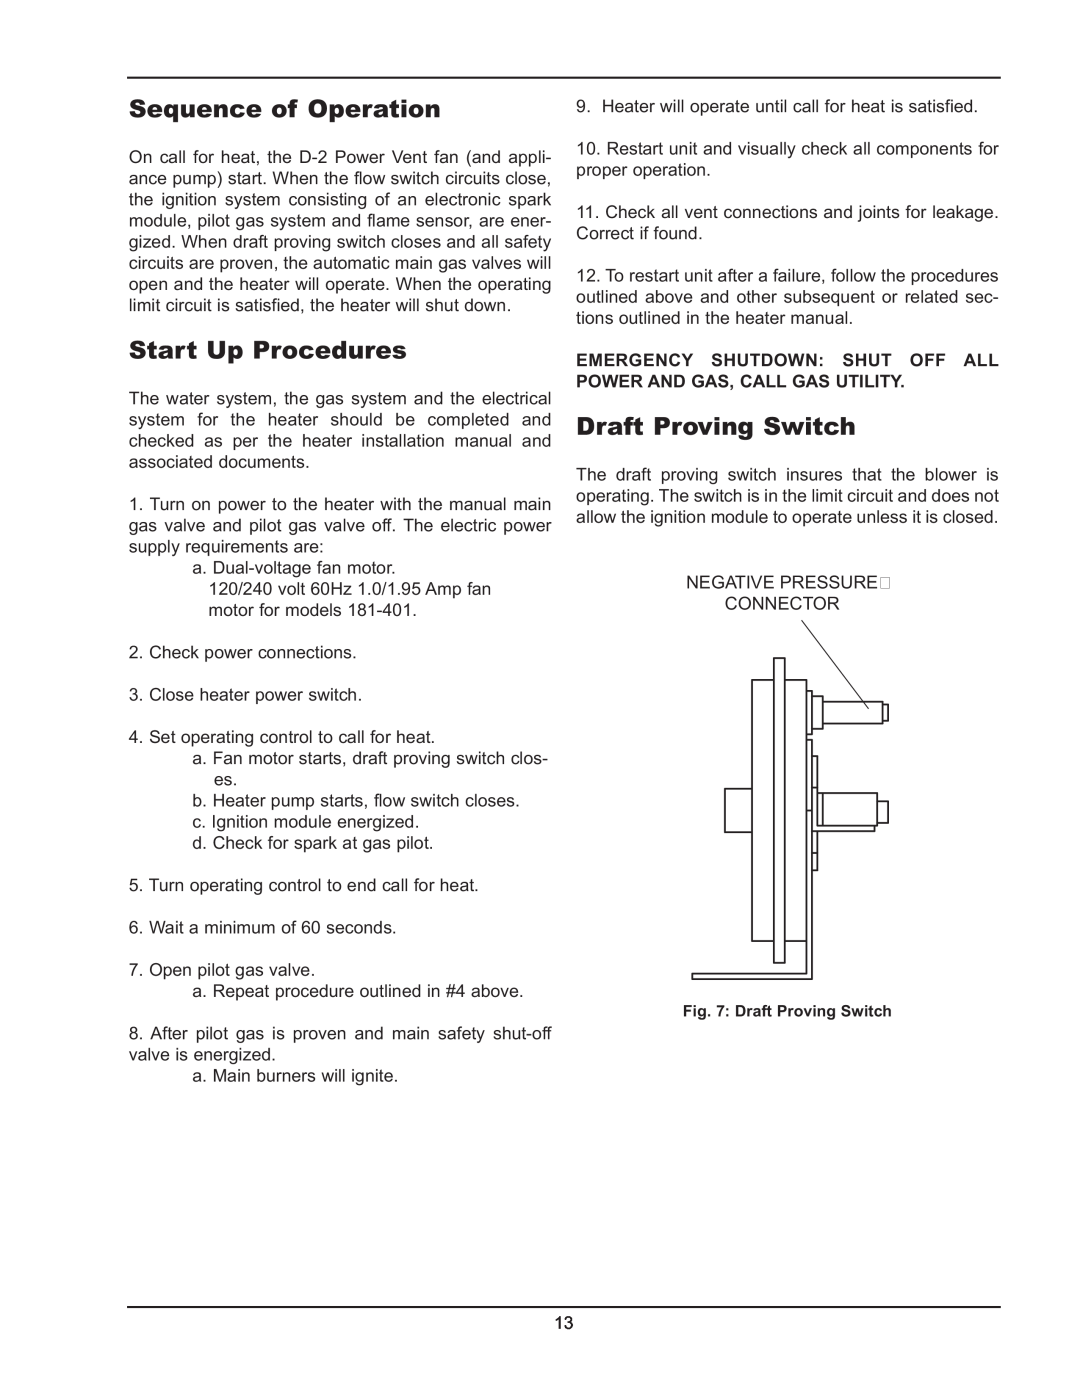 Raypak D2 manual Sequence of Operation, Start Up Procedures, Draft Proving Switch, Negative Pressure Connector 